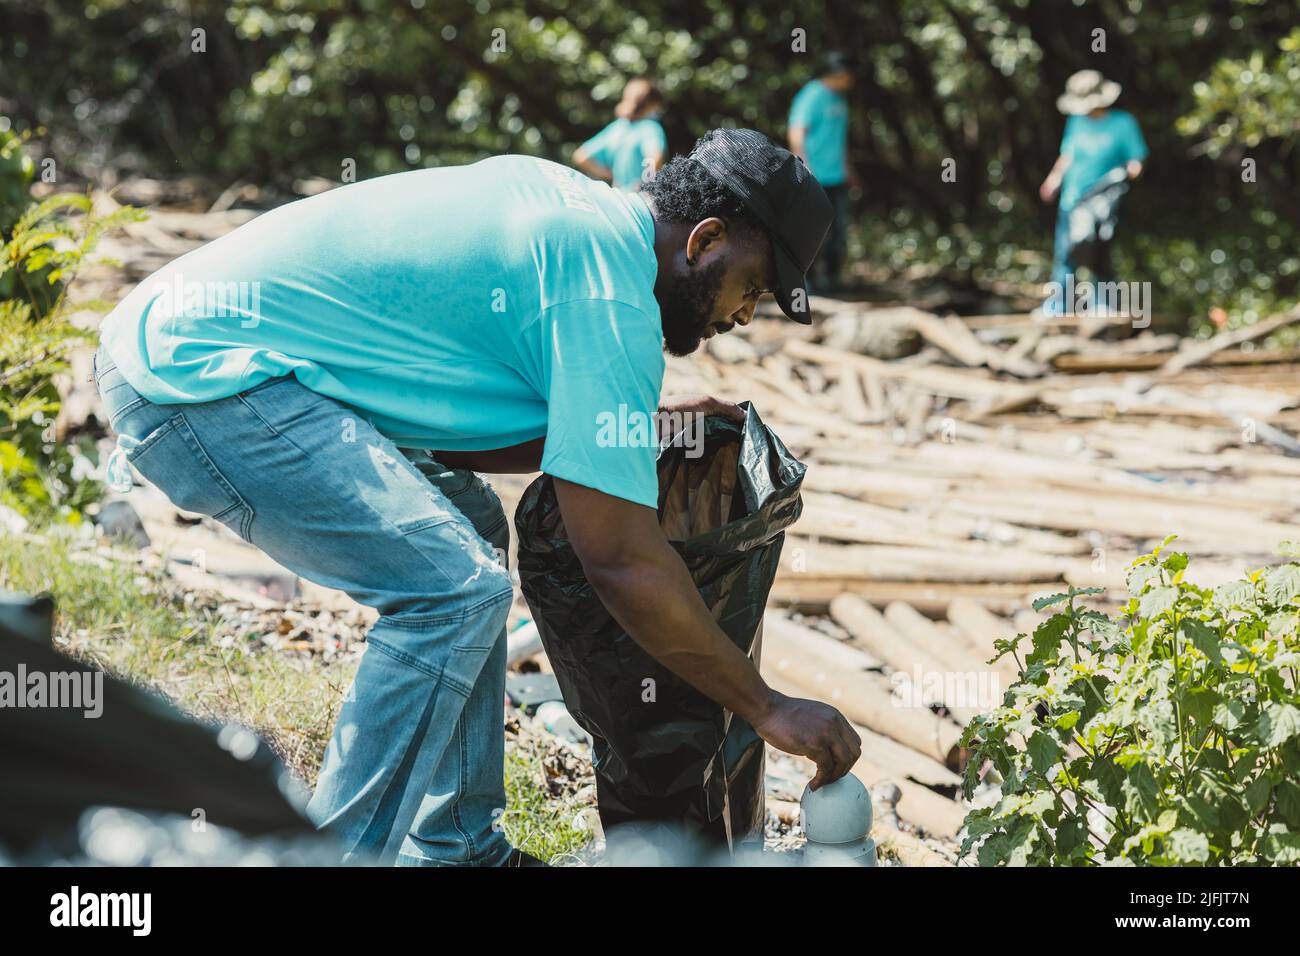 Volunteer People Cleanup Waste and Pollution for Save Environment in Earth Day. Stockfoto